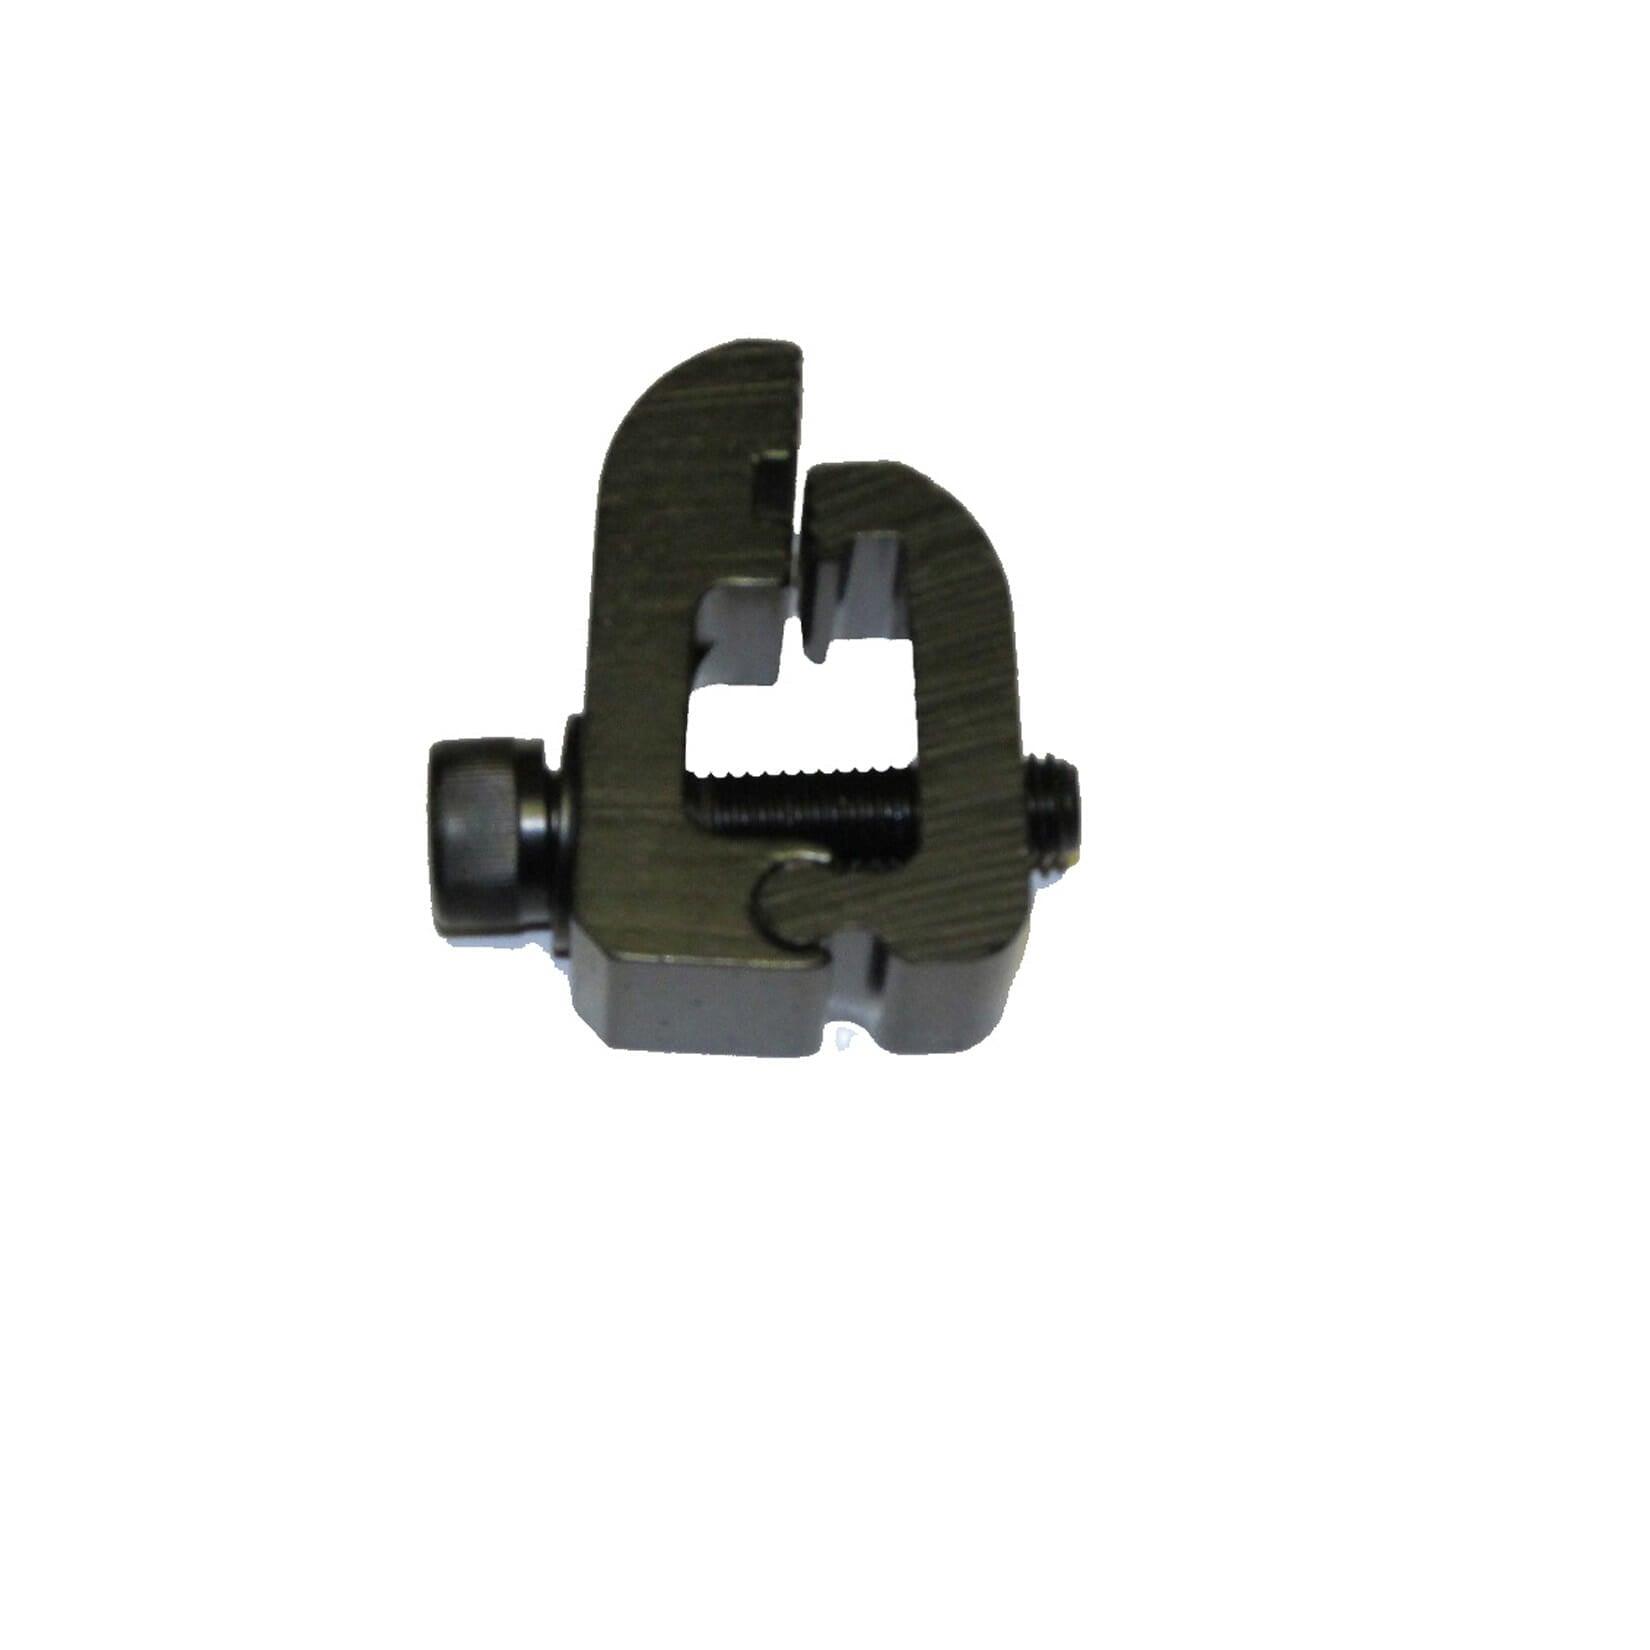 ARMADILLO ROLL TOP COVER CLAMP - Storm Xccessories2